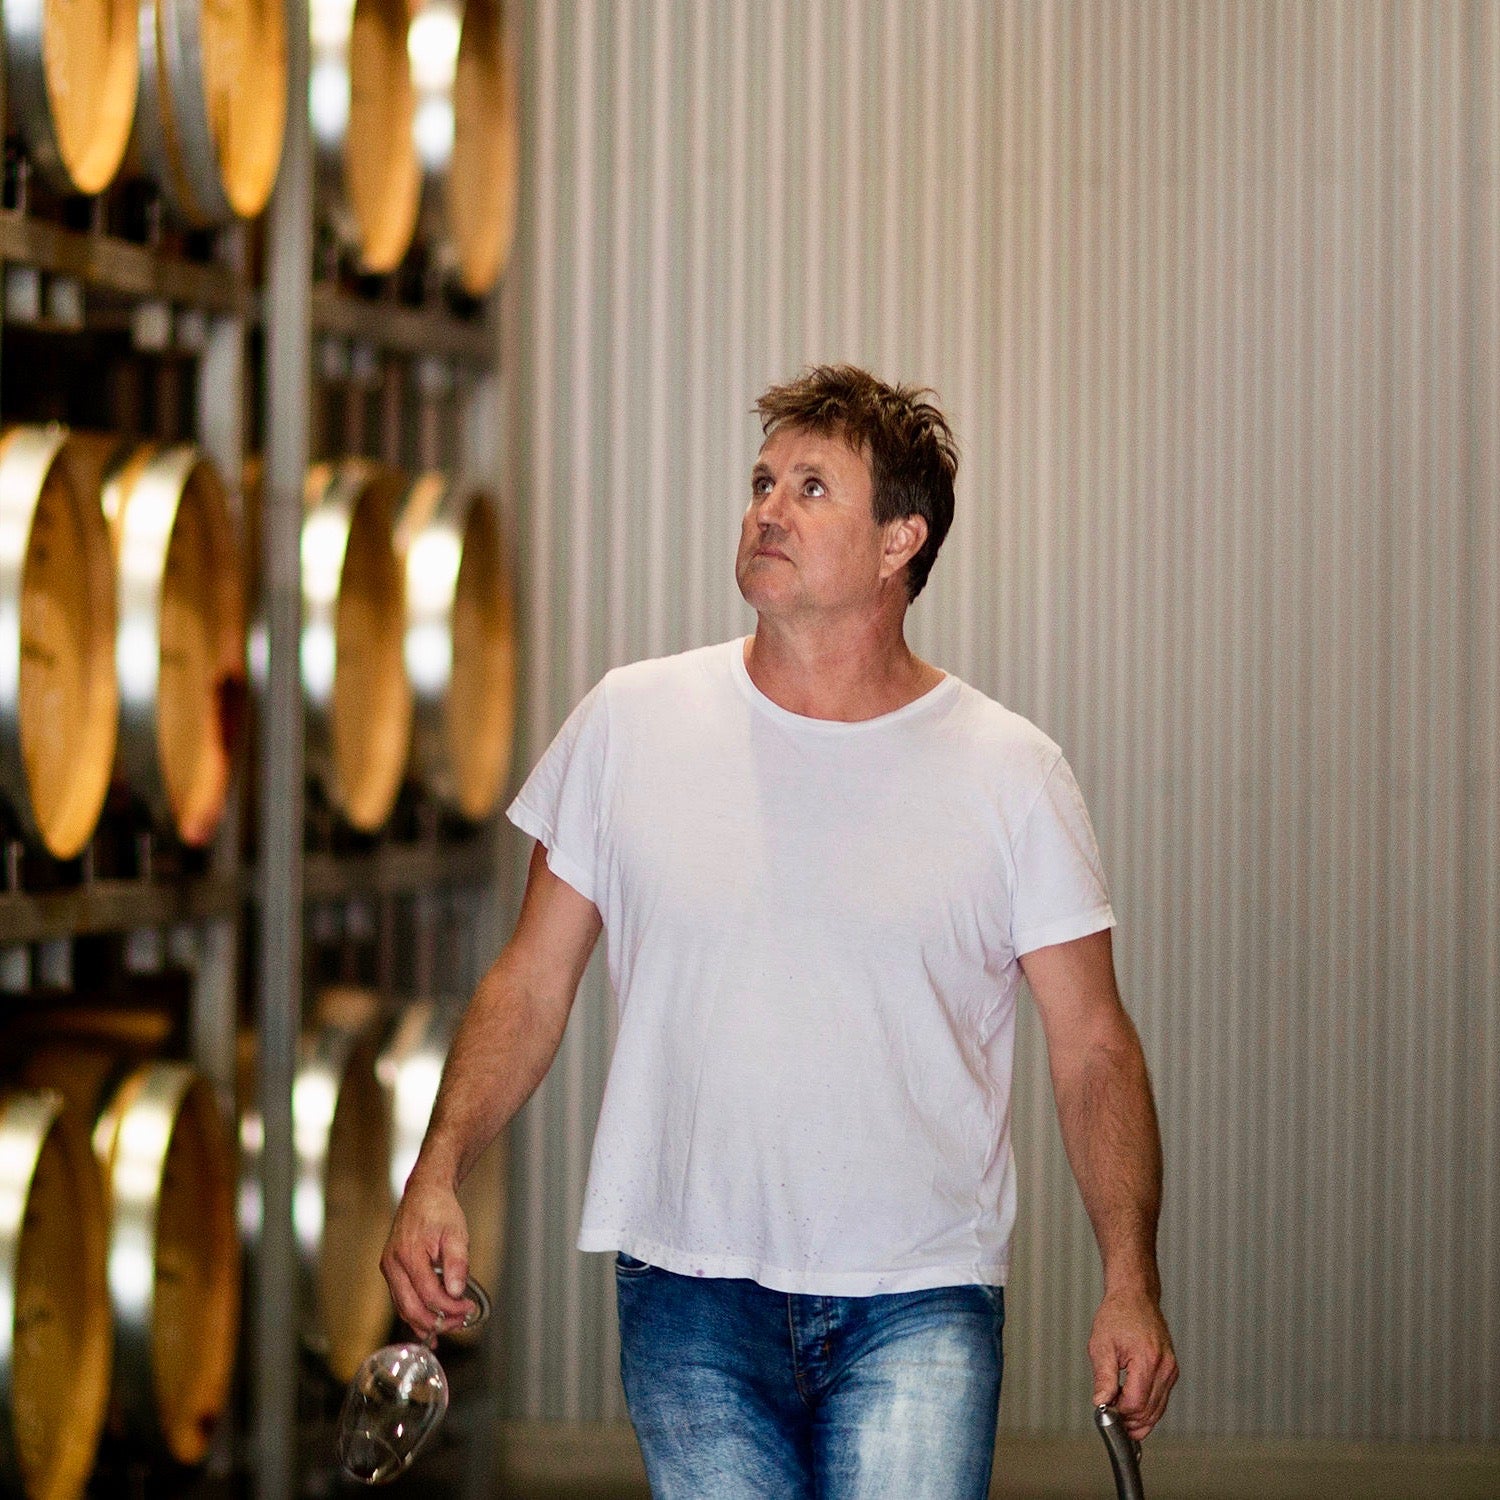 Special Guest: Dean Hewitson, Owner & Winemaker, Hewitson Winery, Barossa Valley